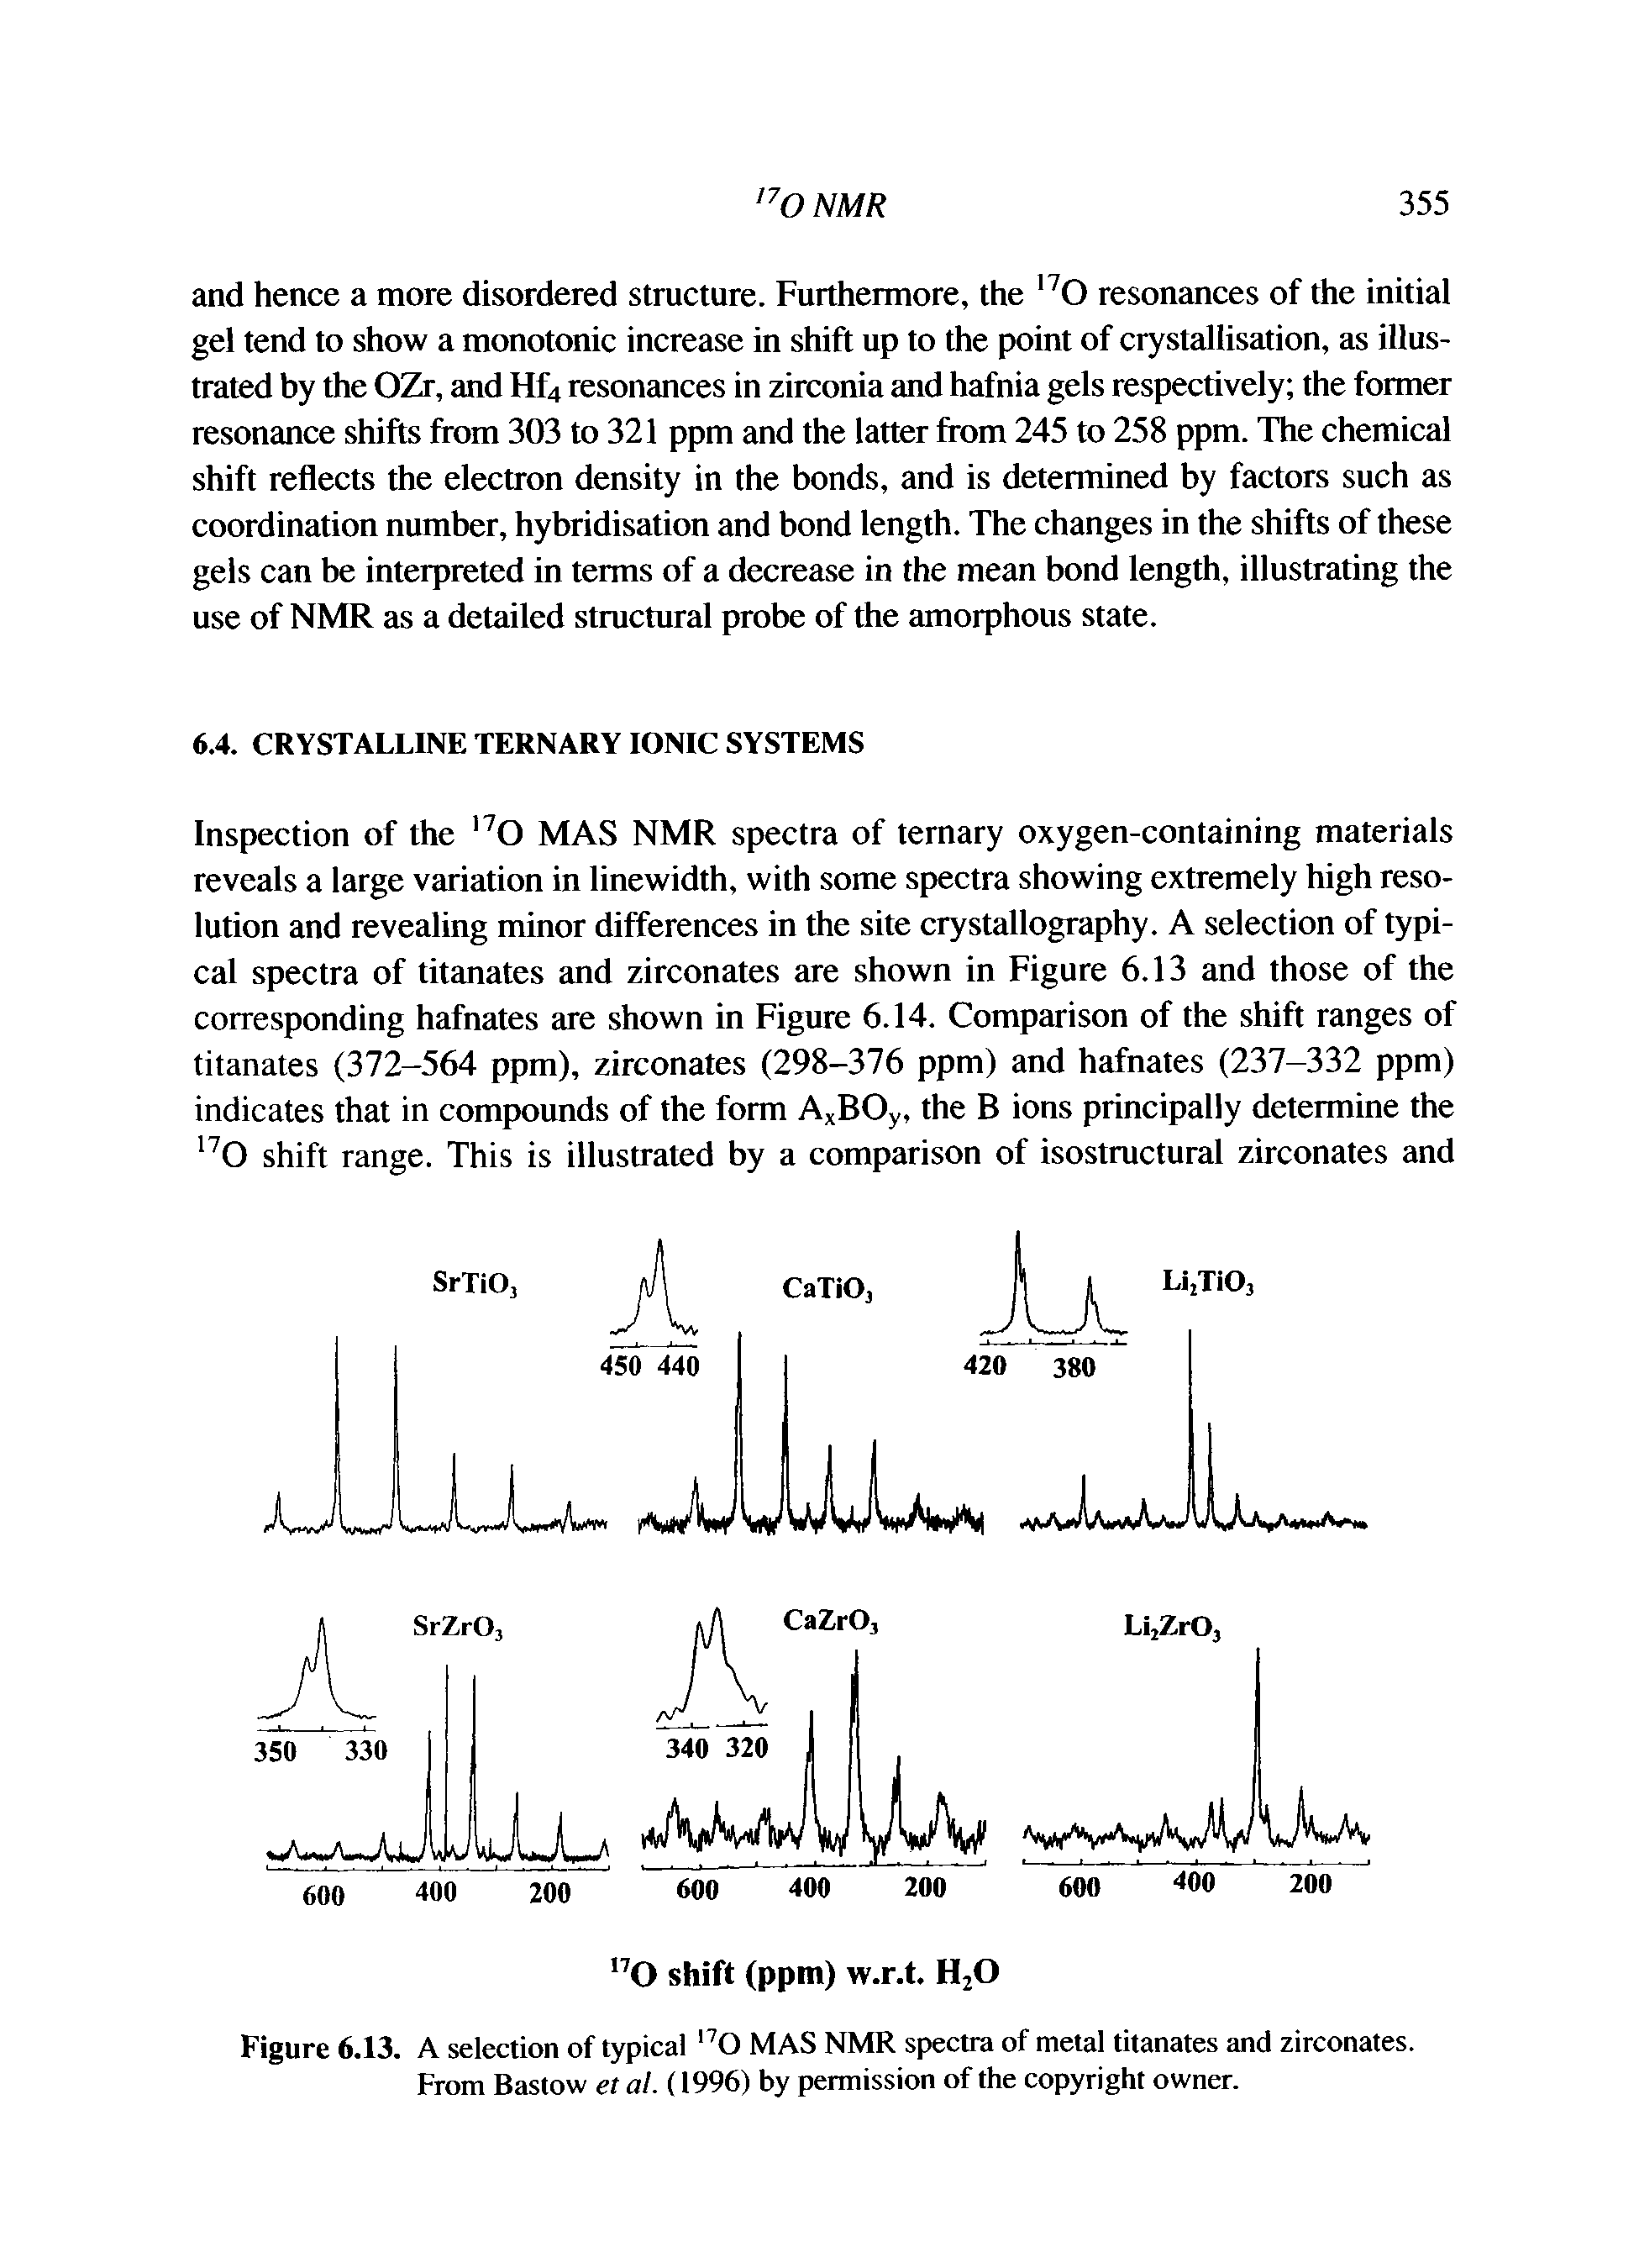 Figure 6.13. A selection of typical O MAS NMR spectra of metal titanates and zirconates. From Bastow et al. (1996) by permission of the copyright owner.